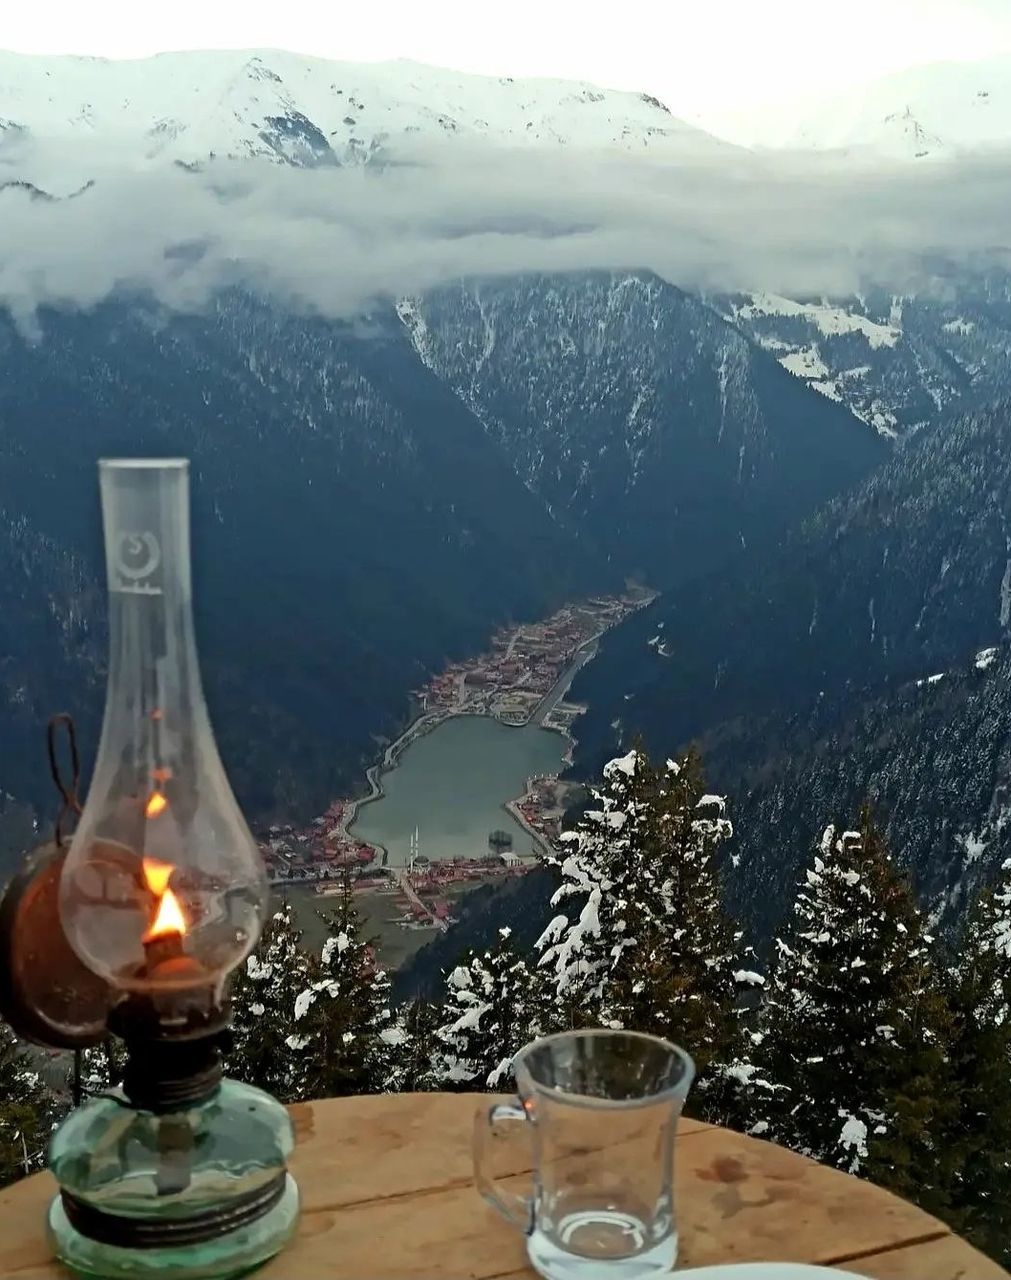 mountain, nature, table, glass, cold temperature, no people, drinking glass, food and drink, snow, environment, mountain range, winter, scenics - nature, beauty in nature, drink, household equipment, refreshment, water, outdoors, sky, alcohol, landscape, day, candle